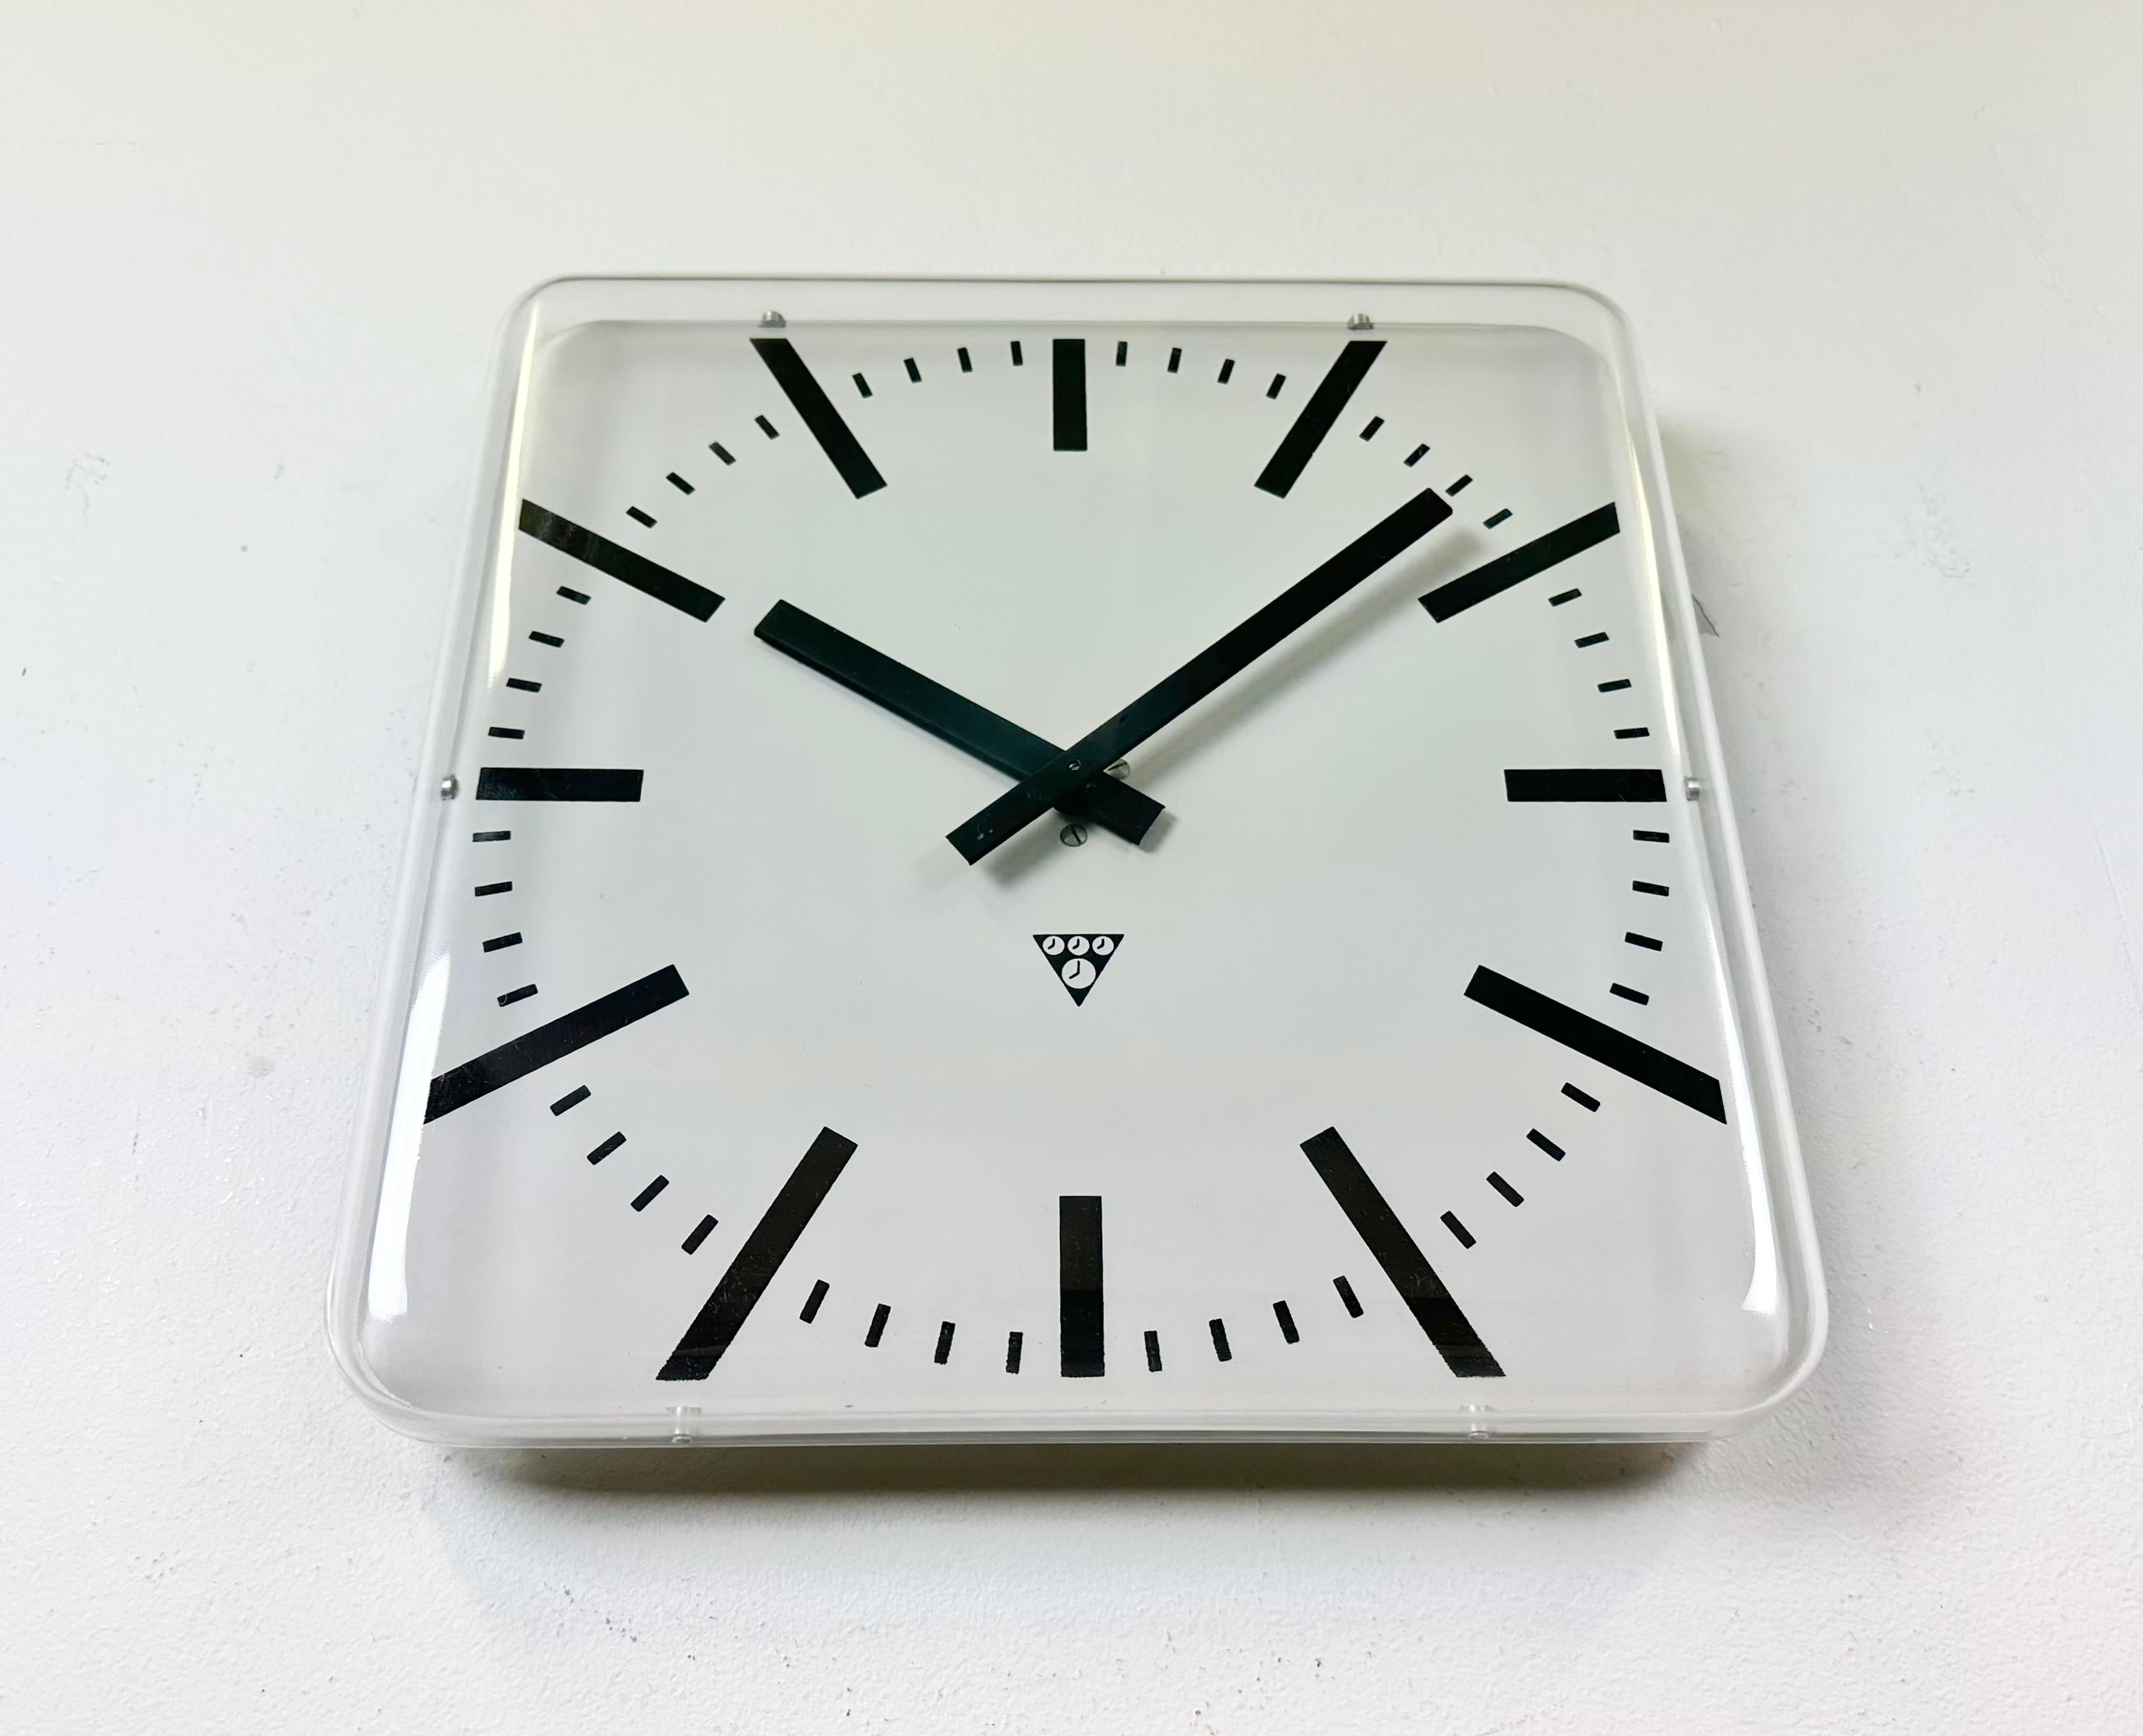 Czech Vintage Square Office Wall Clock from Pragotron, 1980s